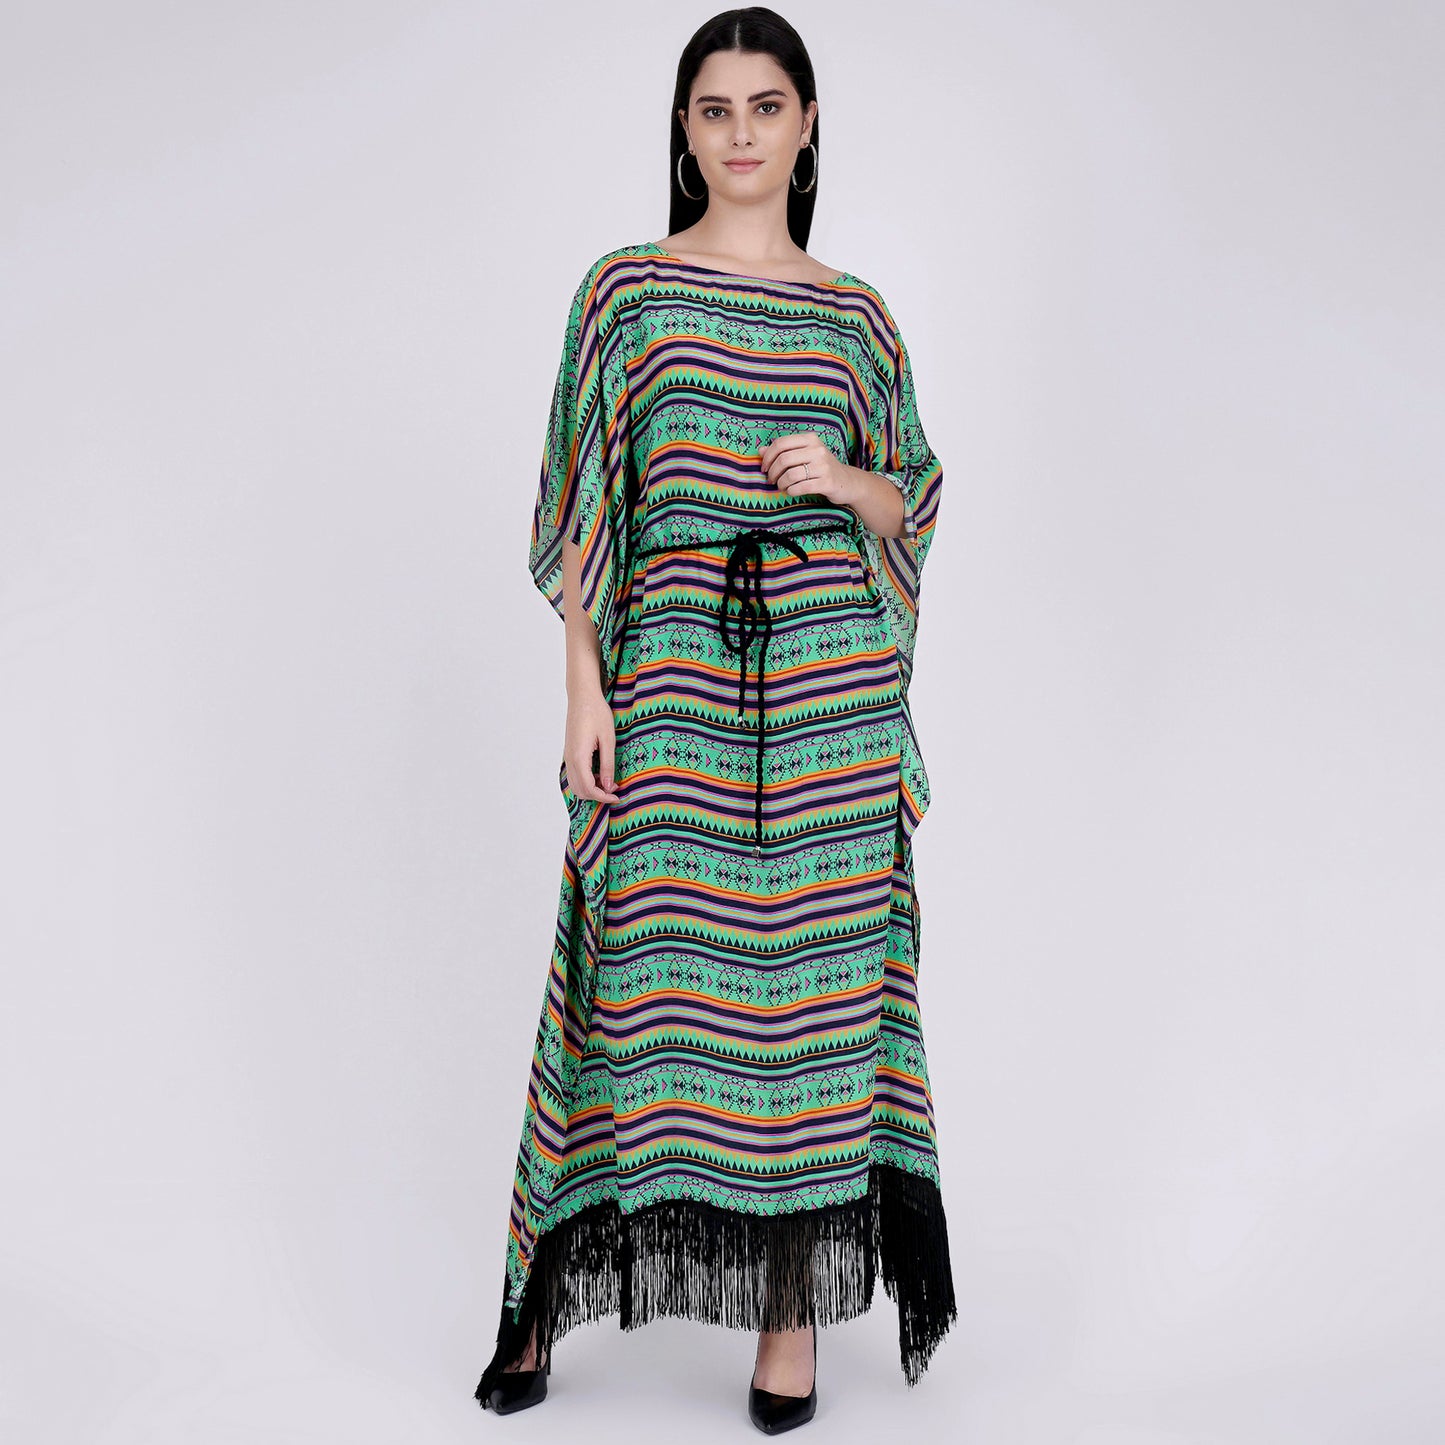 Green and Yellow Aztec Poncho Dress